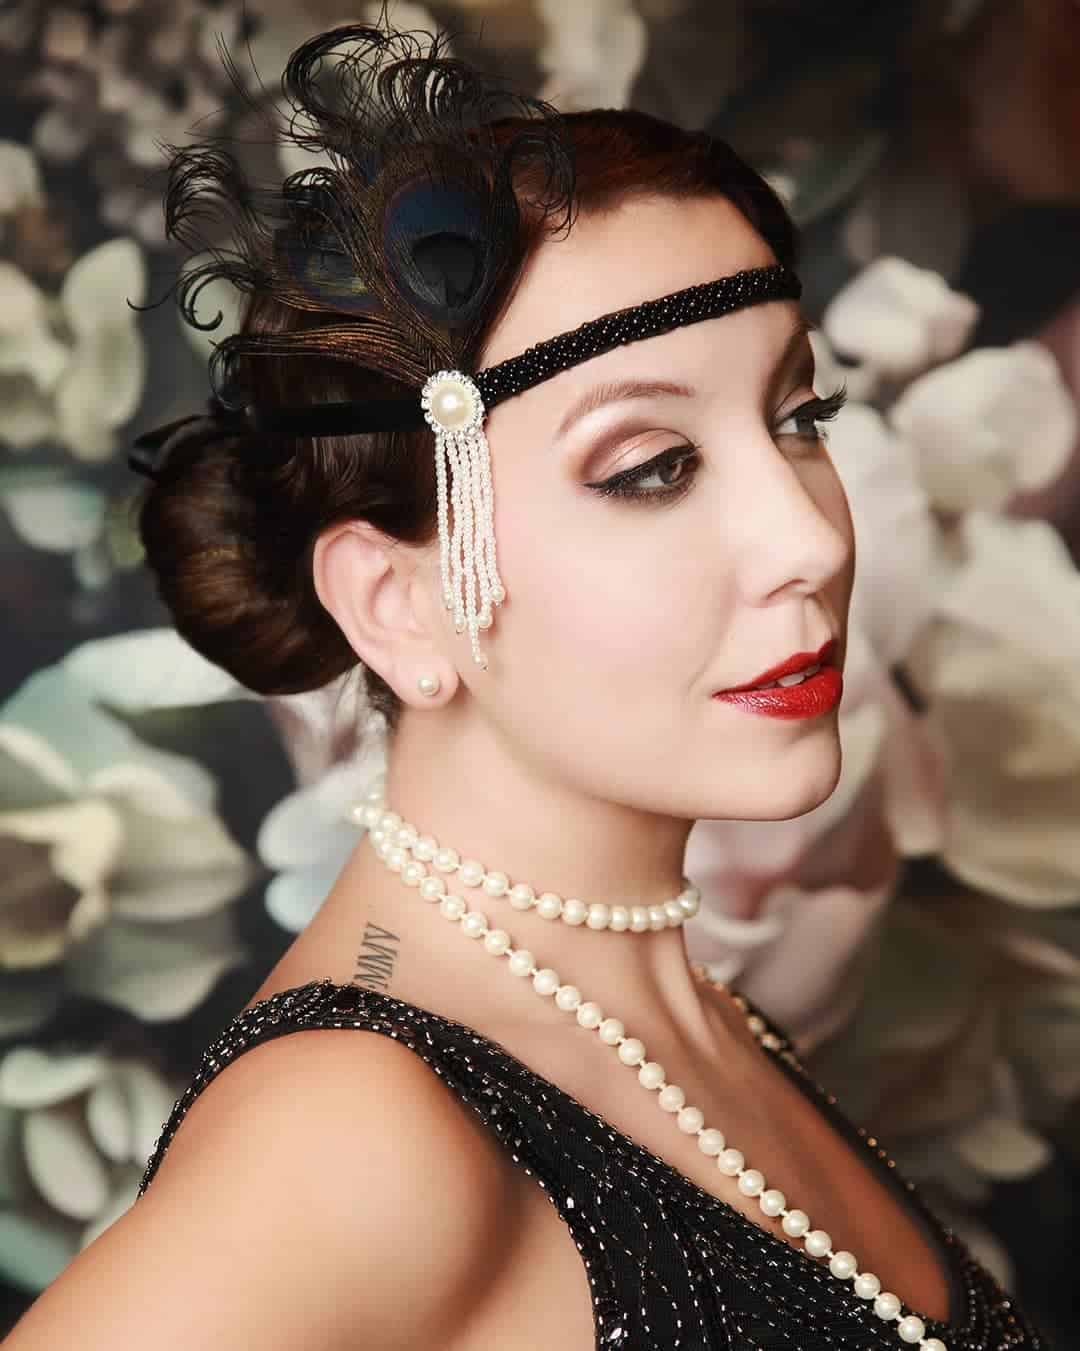 30 Flapper Hairstyles For A Sassy Vintage Chick Look - Wild About Beauty